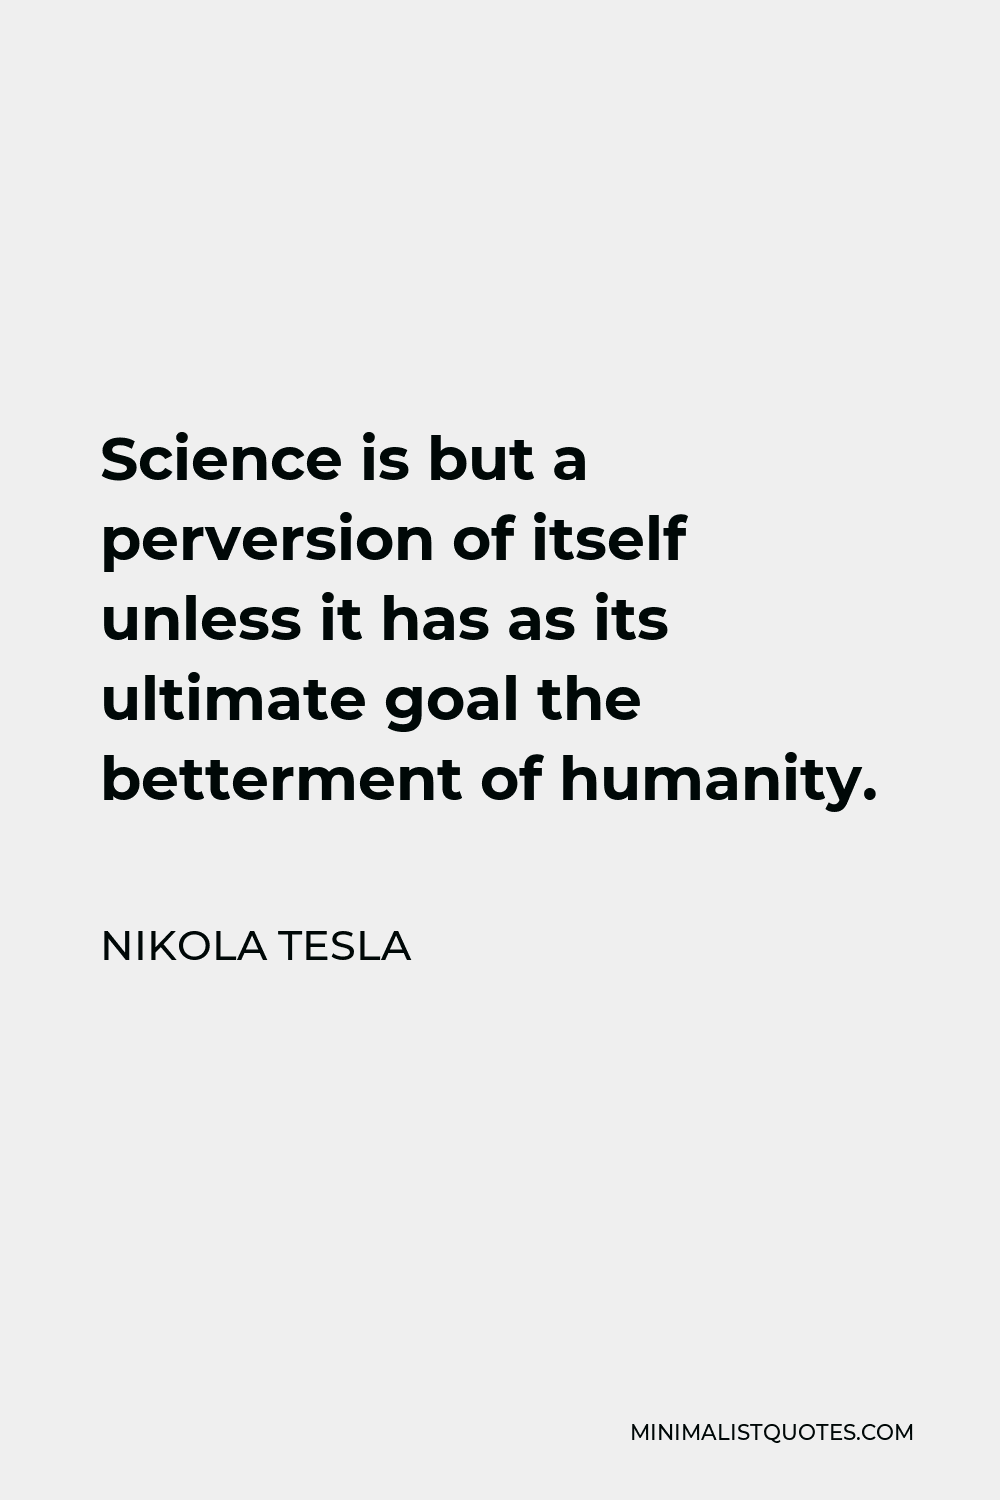 Nikola Tesla Quote - Science is but a perversion of itself unless it has as its ultimate goal the betterment of humanity.